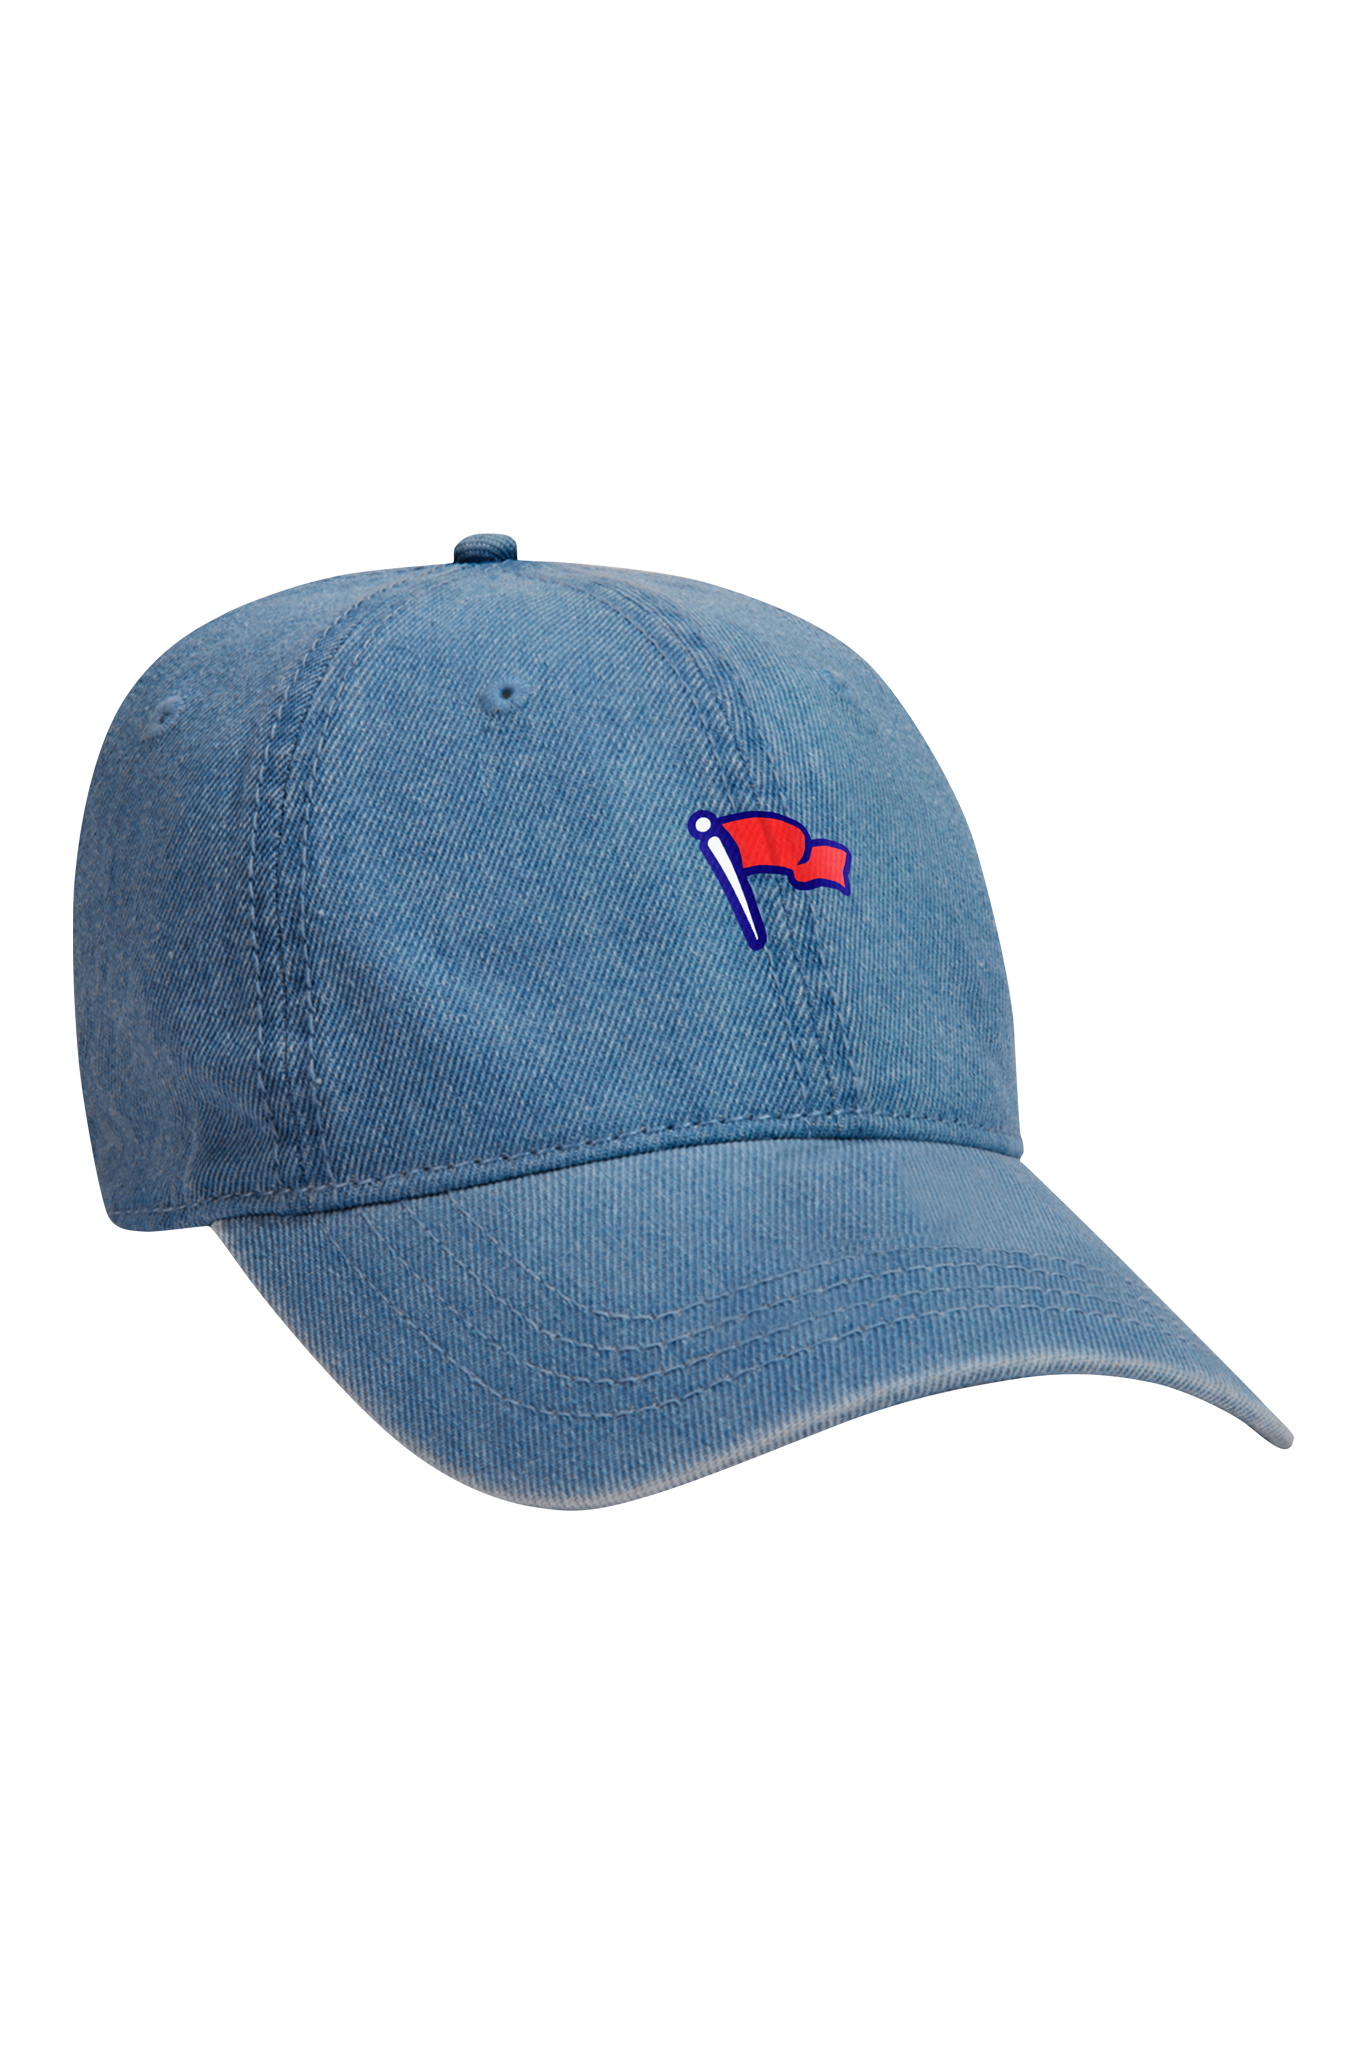 A blue denim-textured baseball cap with a distinctive red and blue flag emblem on the side.